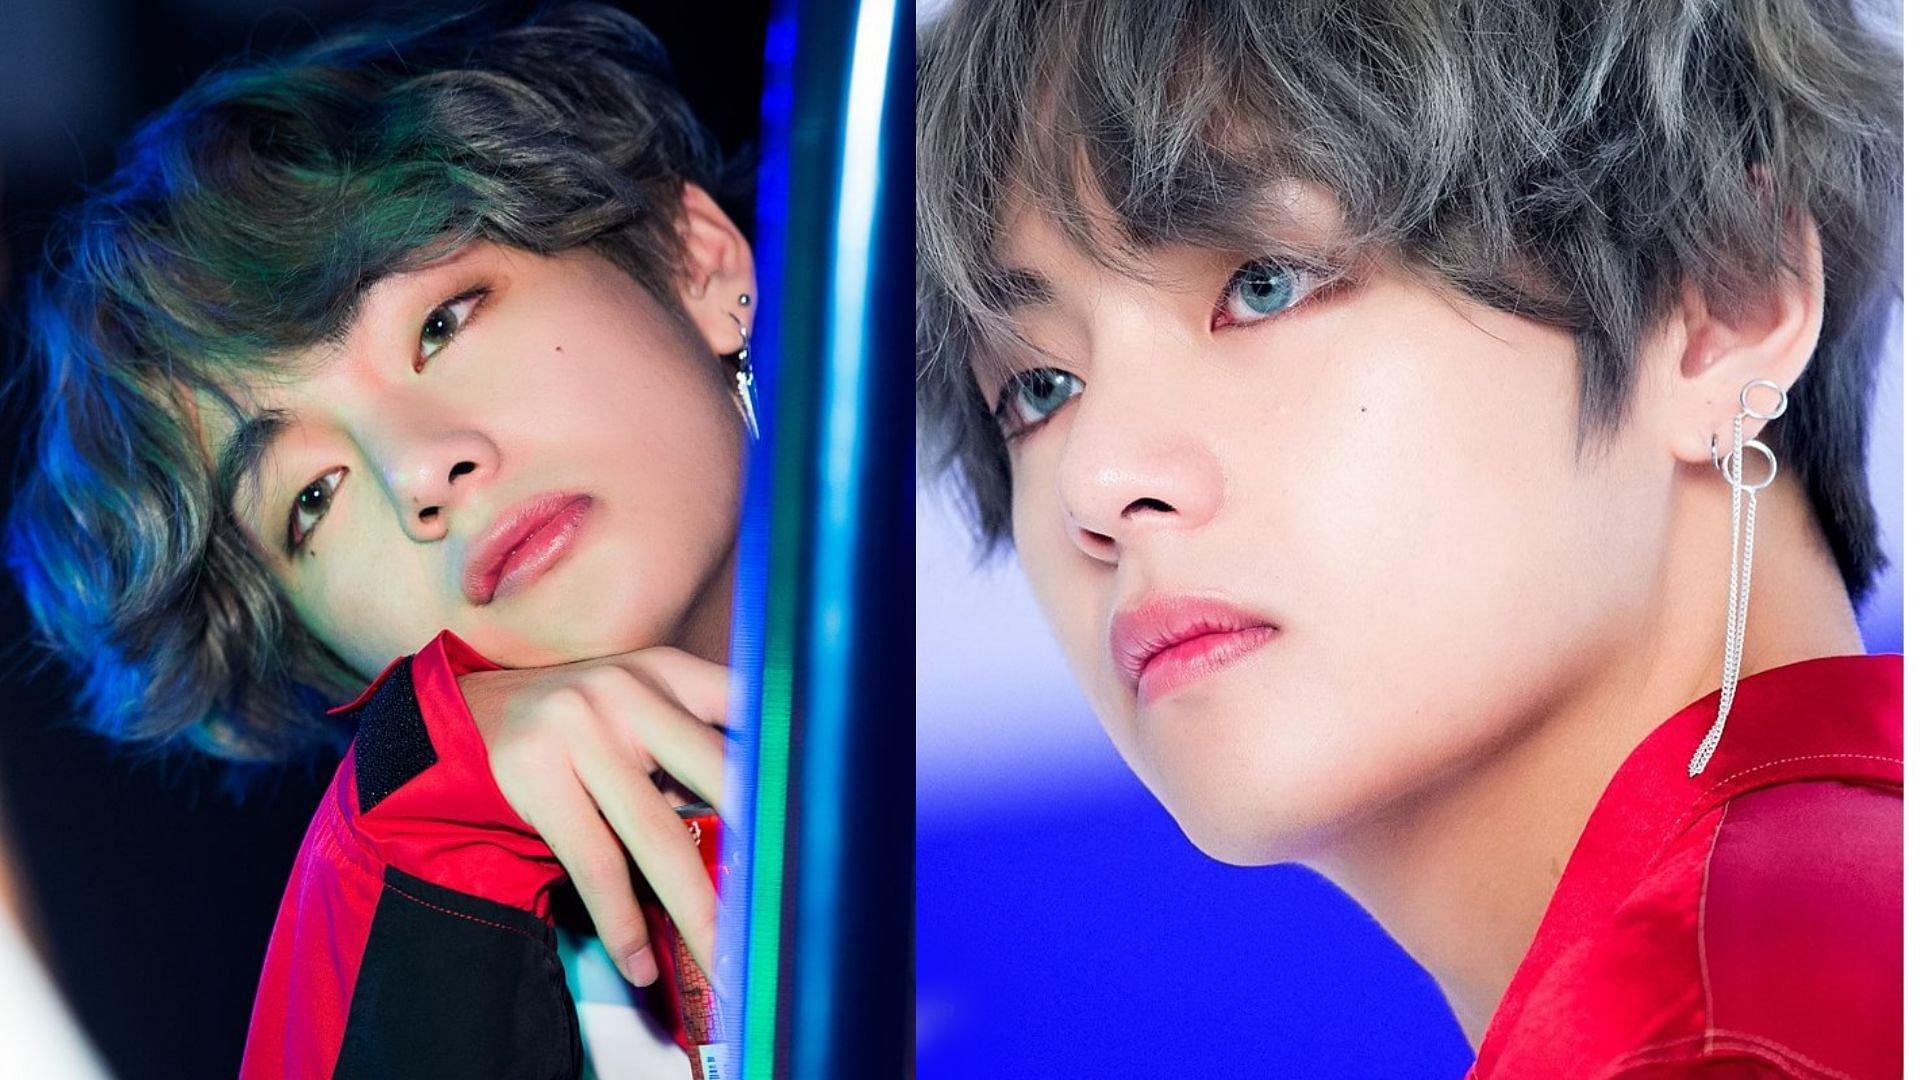 Kim Tae-hyung&#039;s silver hair is one of his best looks according to fans (Images via Dispatch)